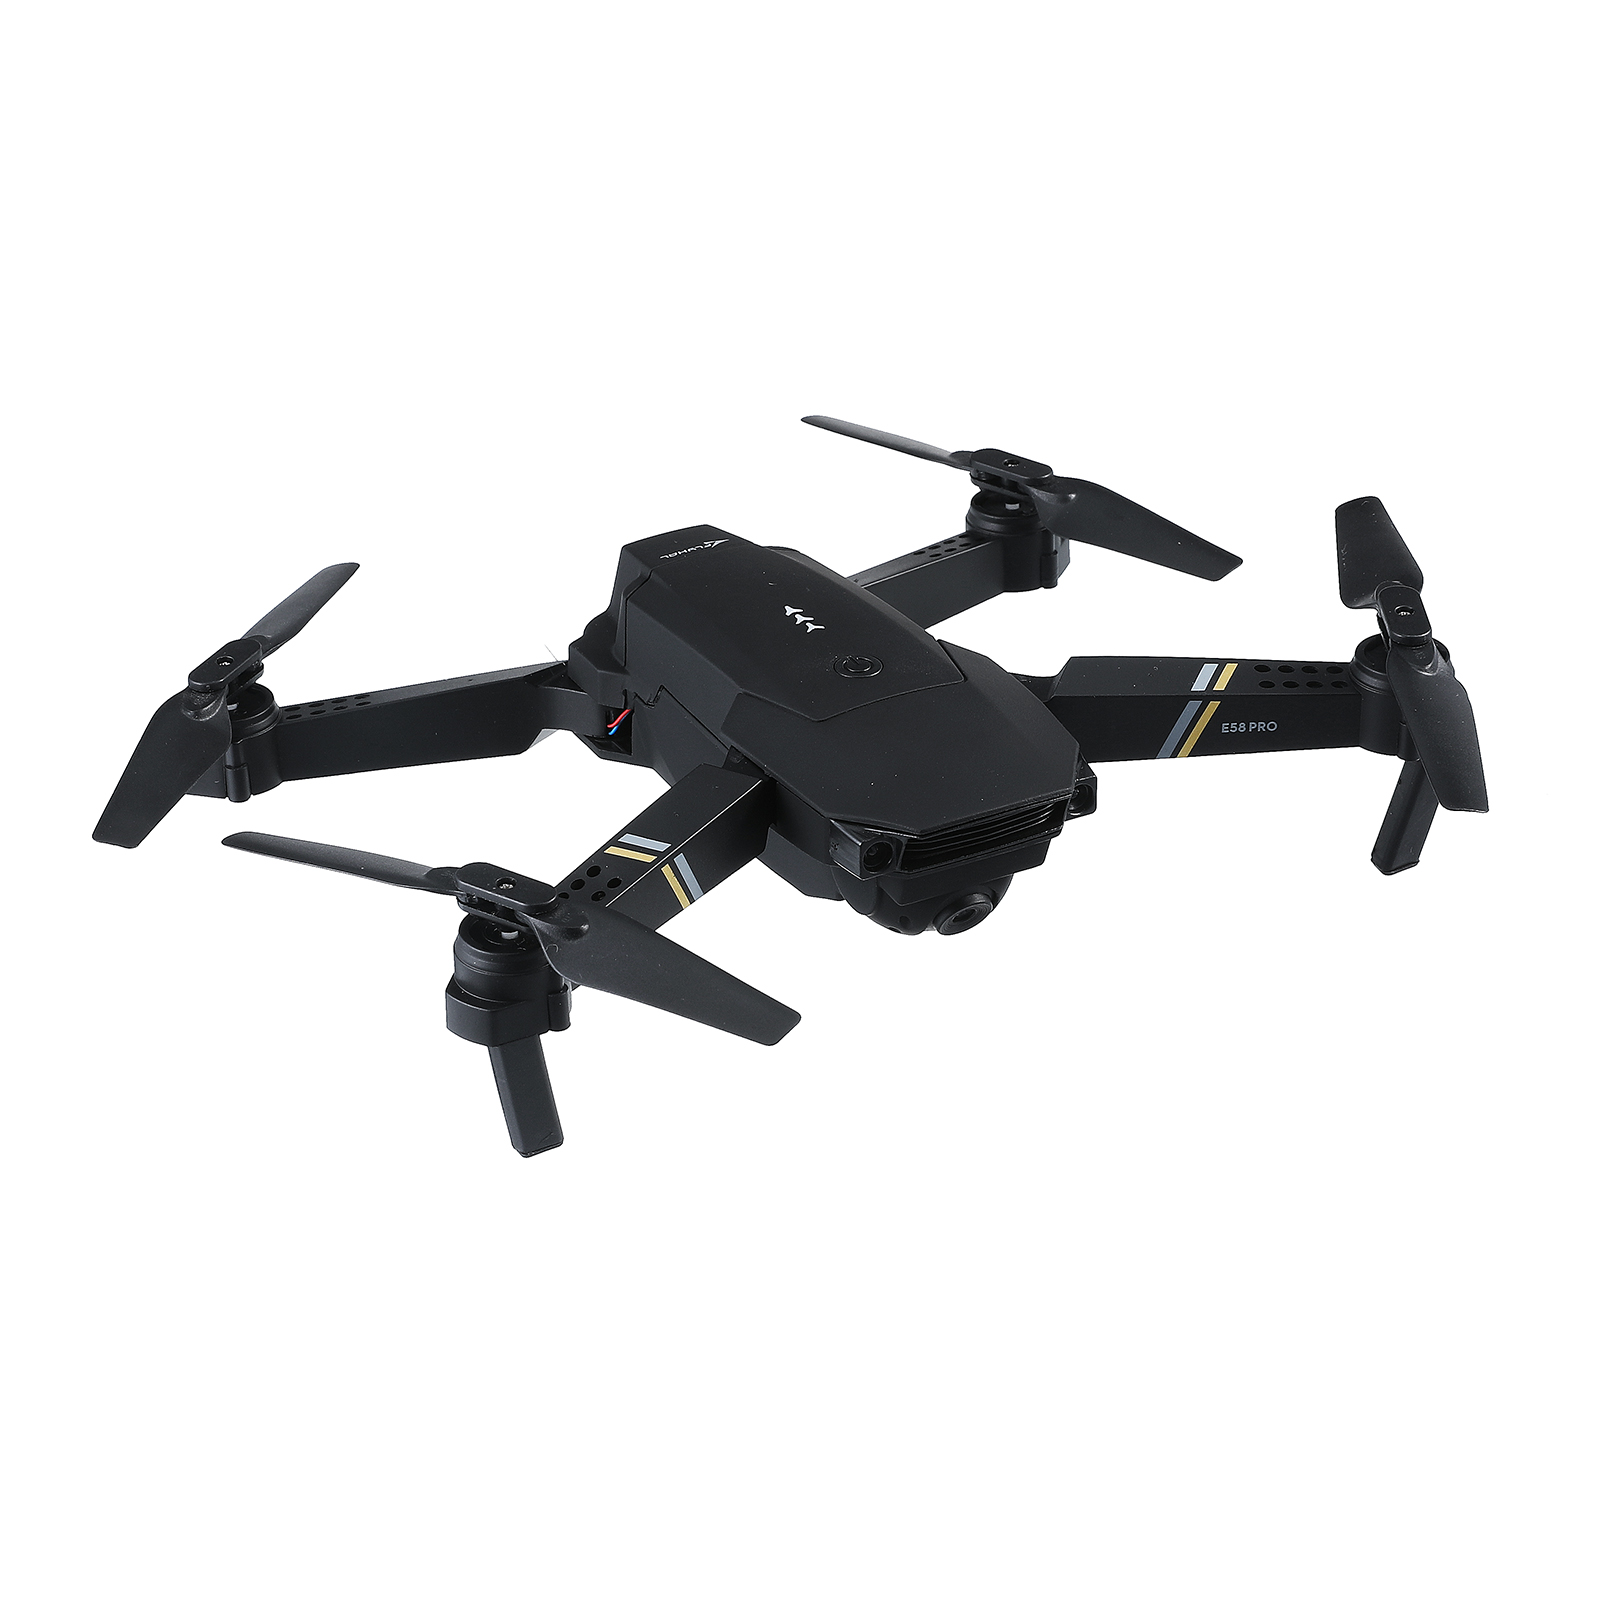 Find FLYHAL E58 PRO WIFI FPV With 120Â° FOV 1080P HD Camera Adjustment Angle High Hold Mode Foldable RC Drone Quadcopter RTF for Sale on Gipsybee.com with cryptocurrencies